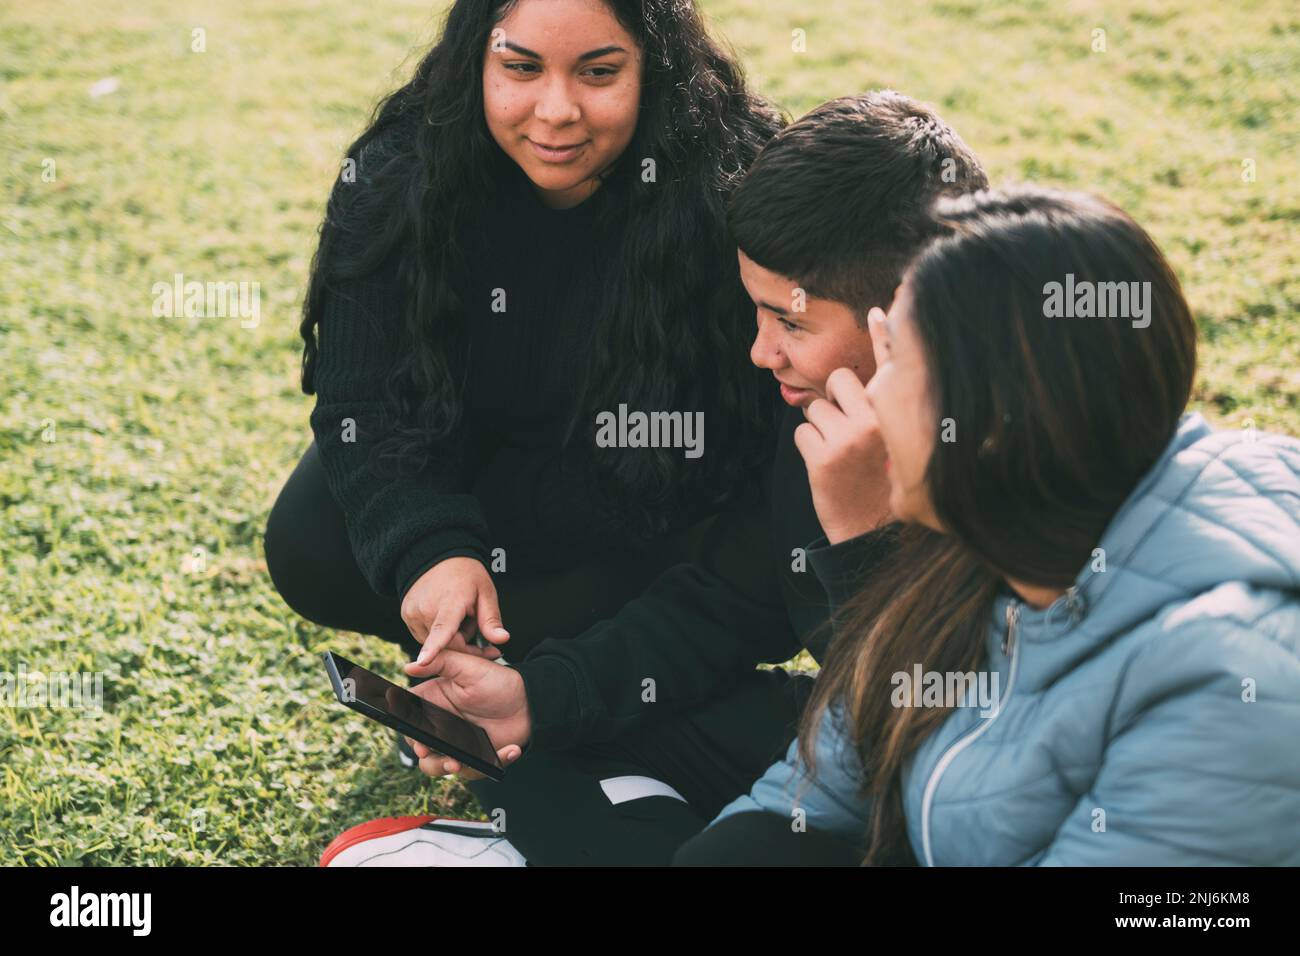 Hispanic family spending quality time together in a local park on a beautiful, sunny day. A teenage boy is sitting on the grass, holding his Stock Photo